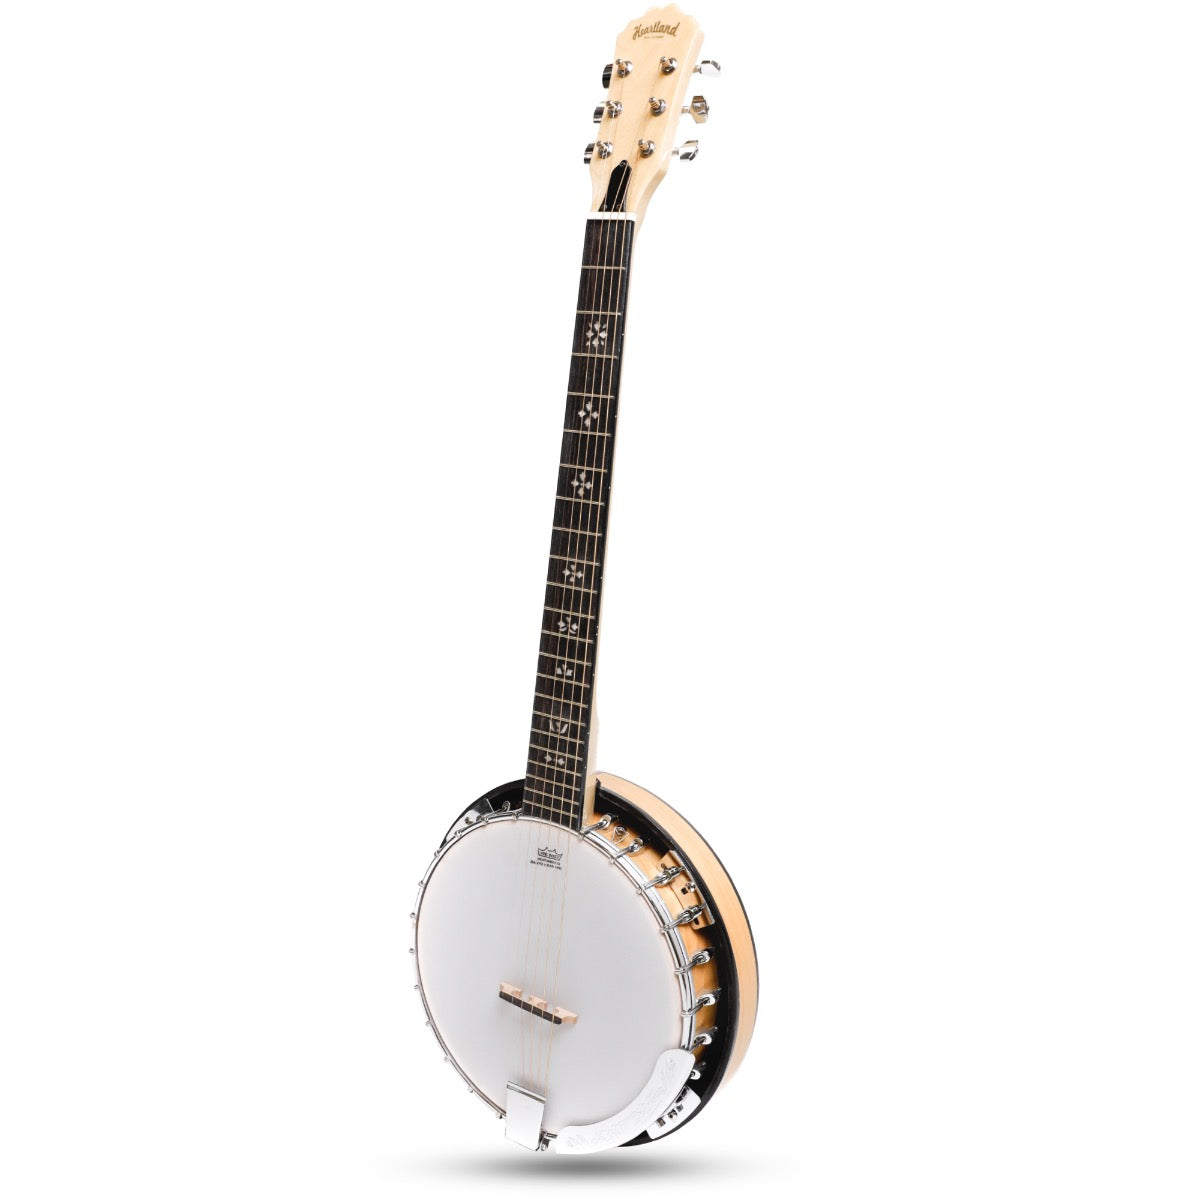 HEARTLAND 6 STRING DELUXE IRISH BANJO LEFT HANDED 24 BRACKET WITH CLOSED SOLID BACK MAPLE FINISH